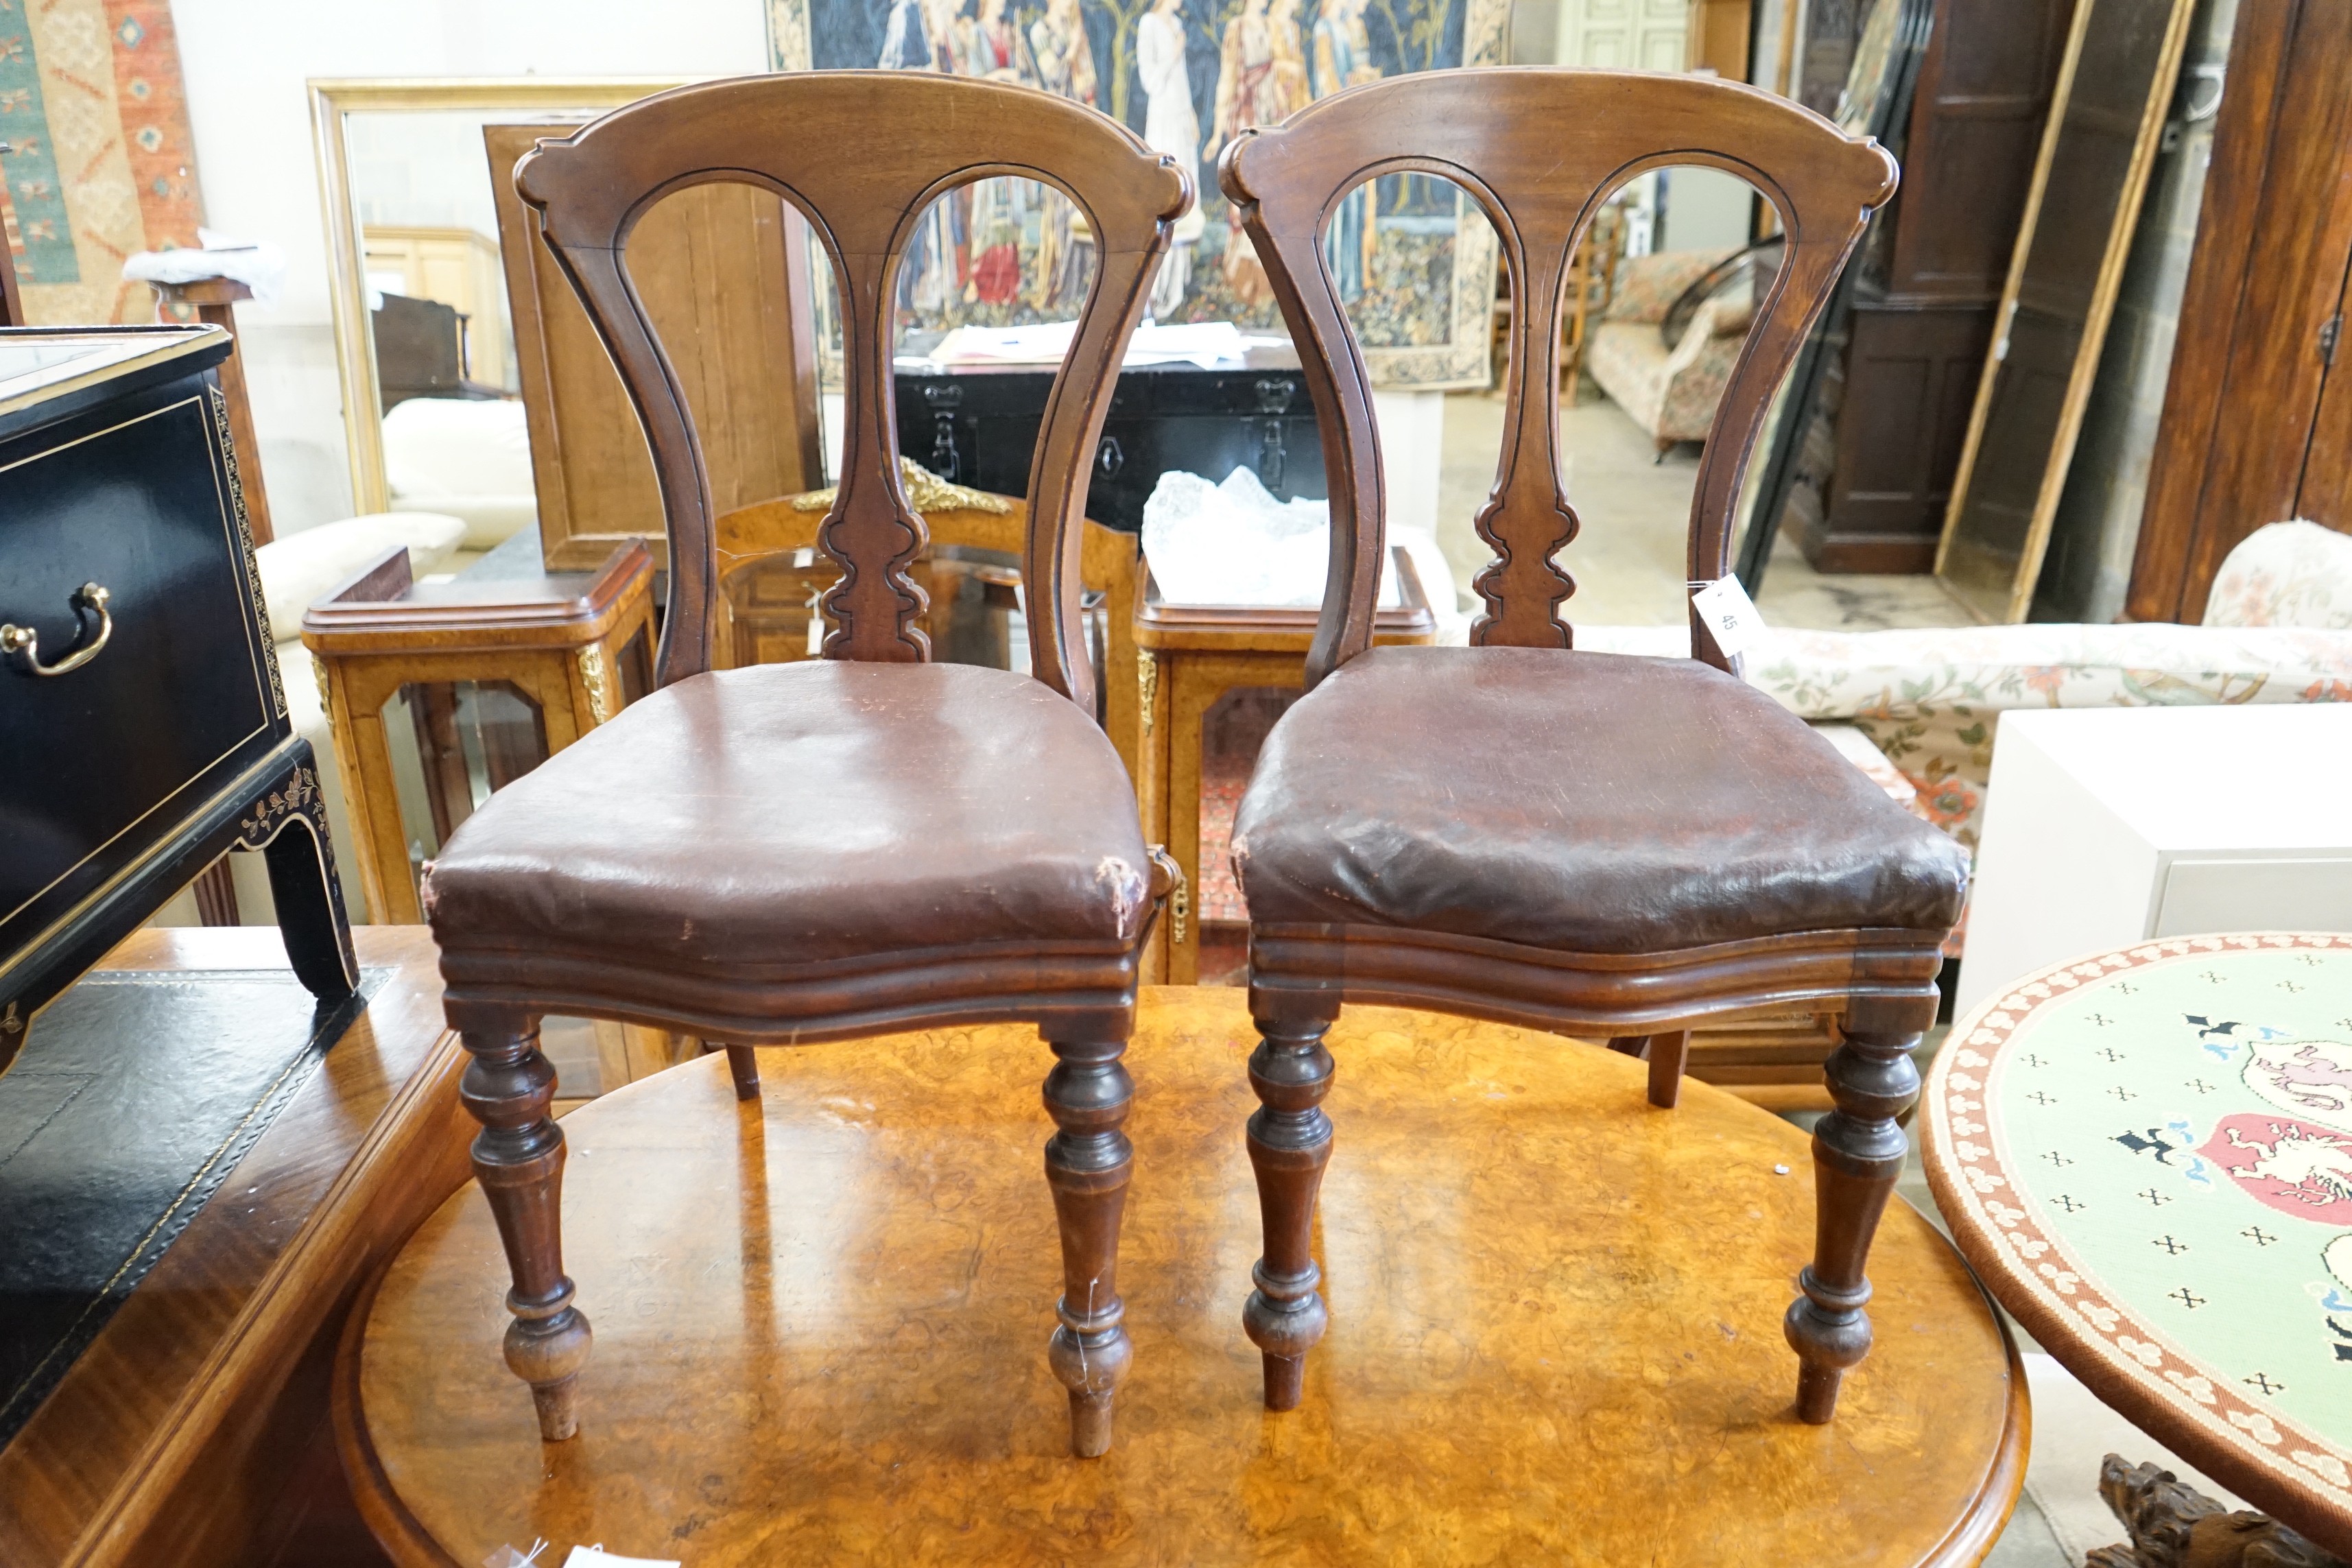 A set of six Victorian mahogany dining chairs                                                                                                                                                                               